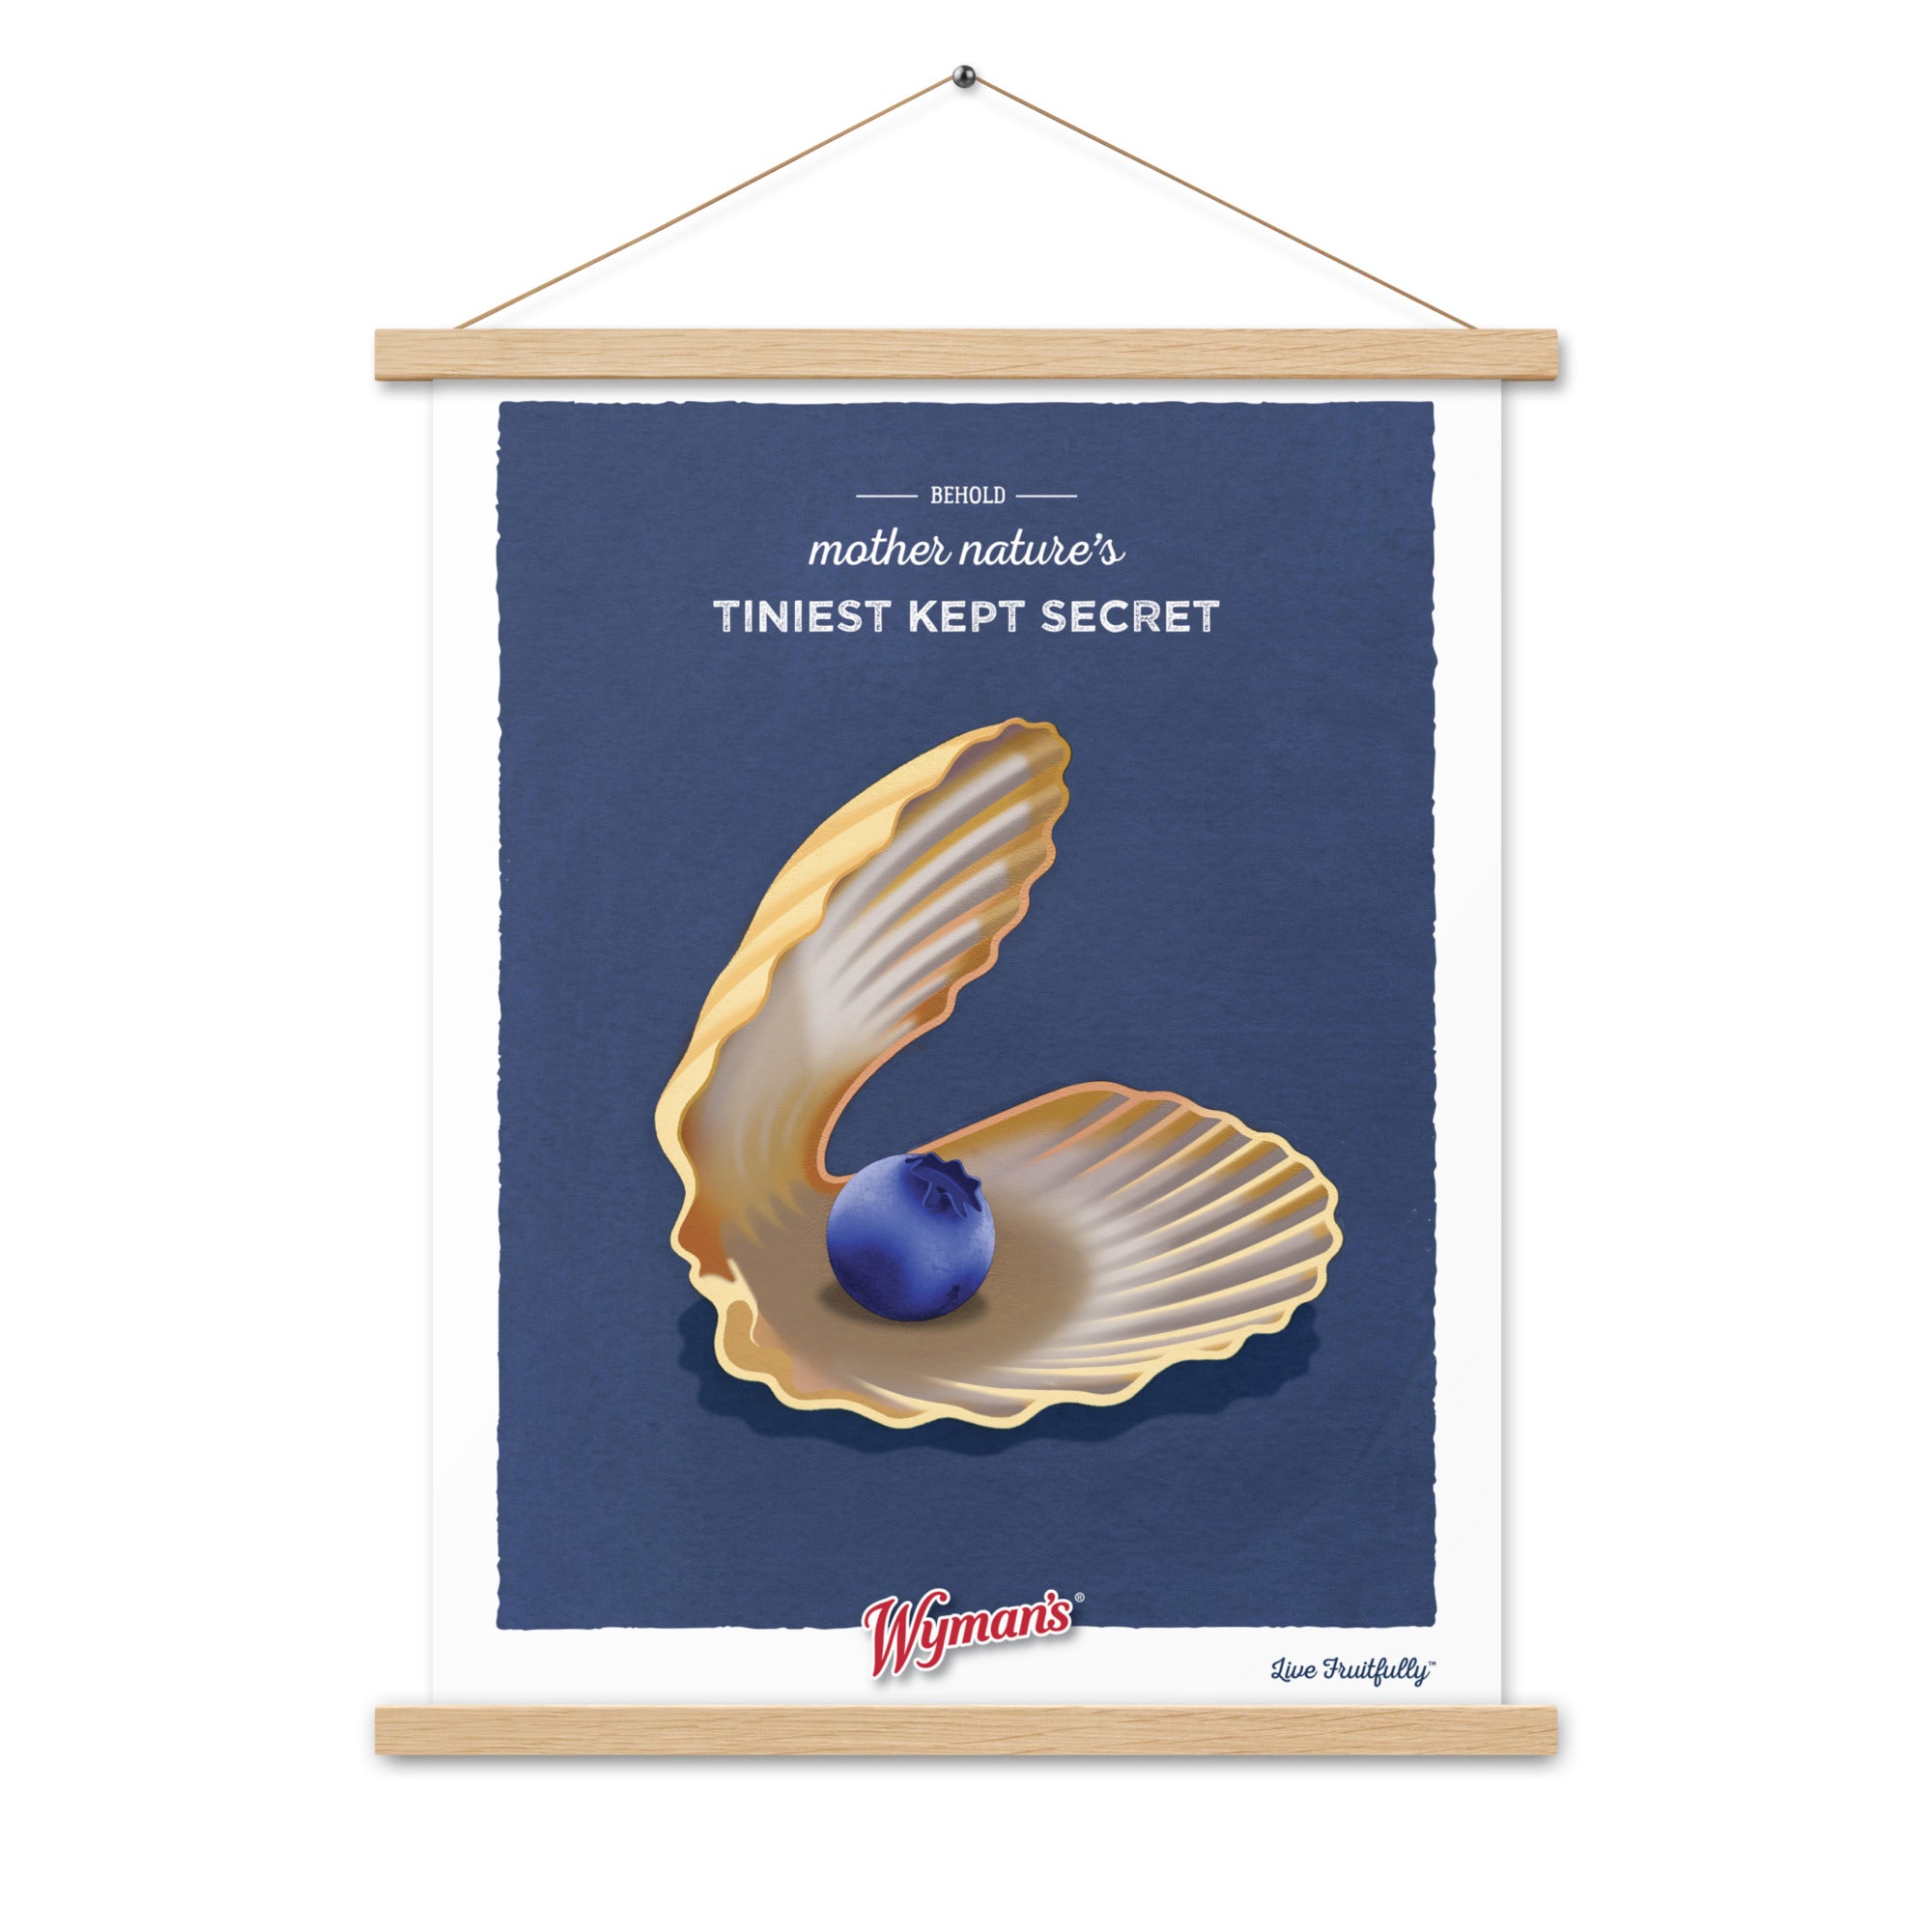 A Behold Mother Nature's Tiniest Kept Secret Poster by Shop Wyman's hanging on the wall.